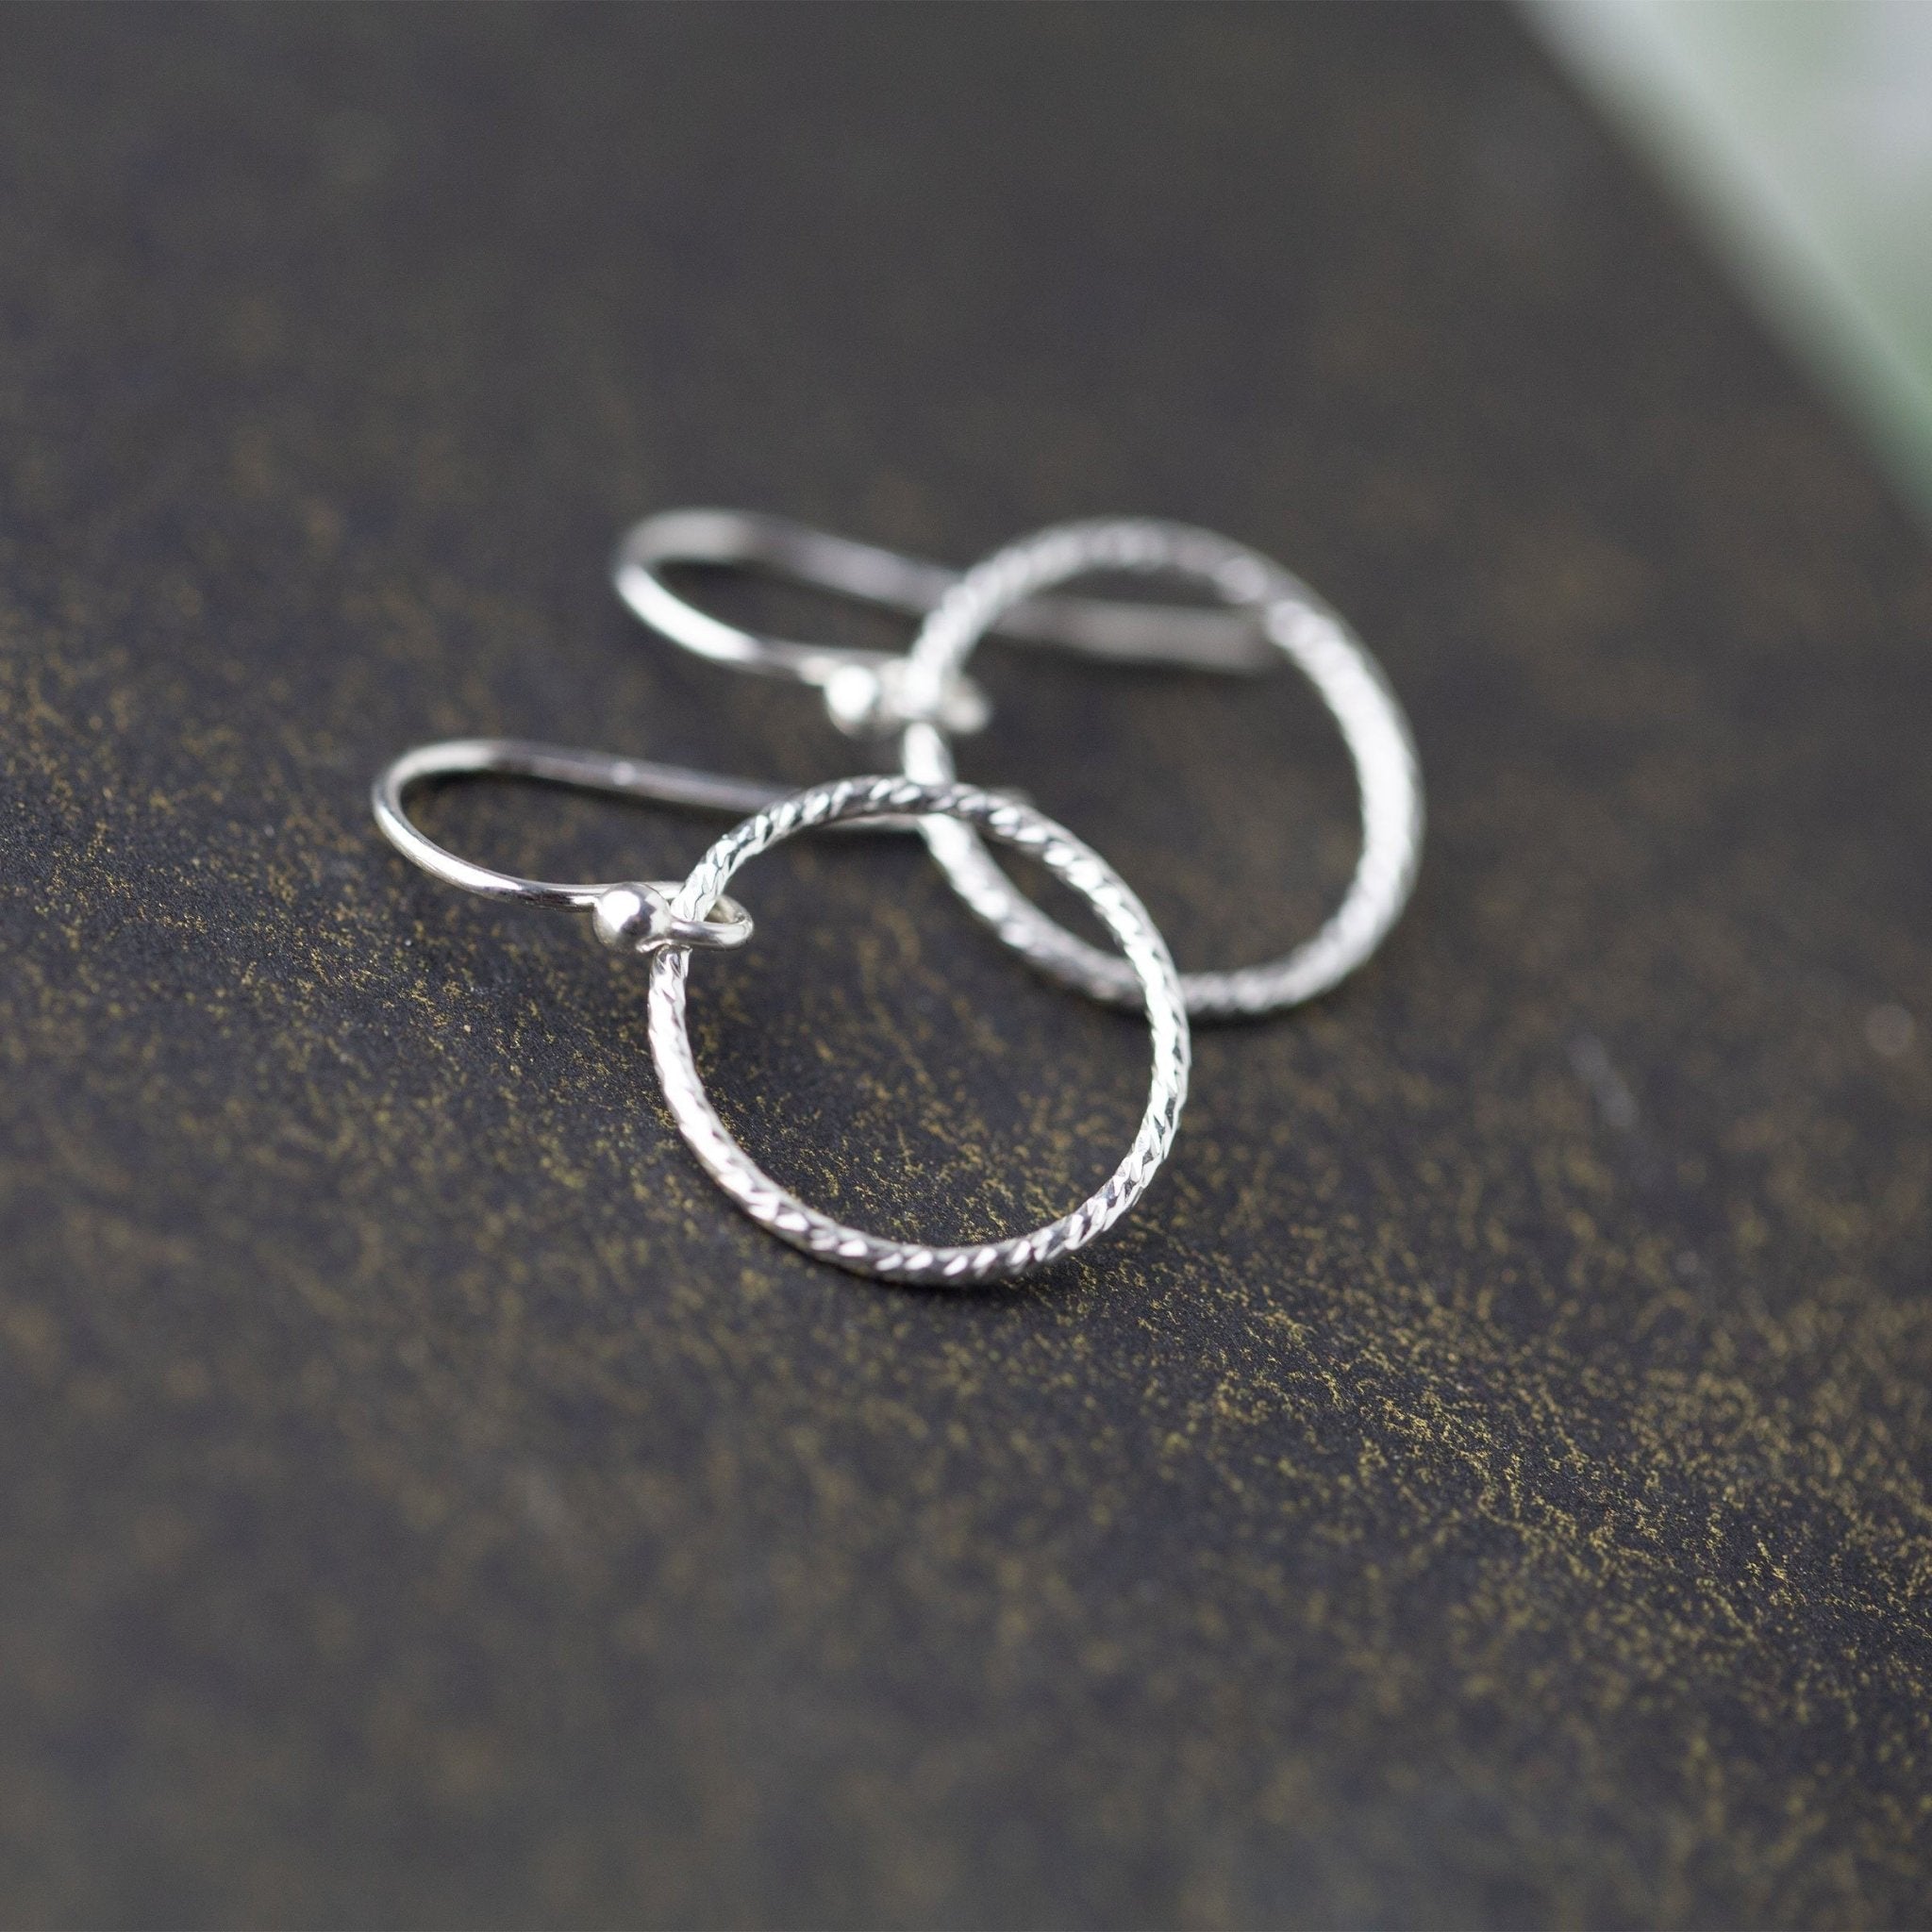 Silver Sparkle Circle Earrings - Handmade Jewelry by Burnish